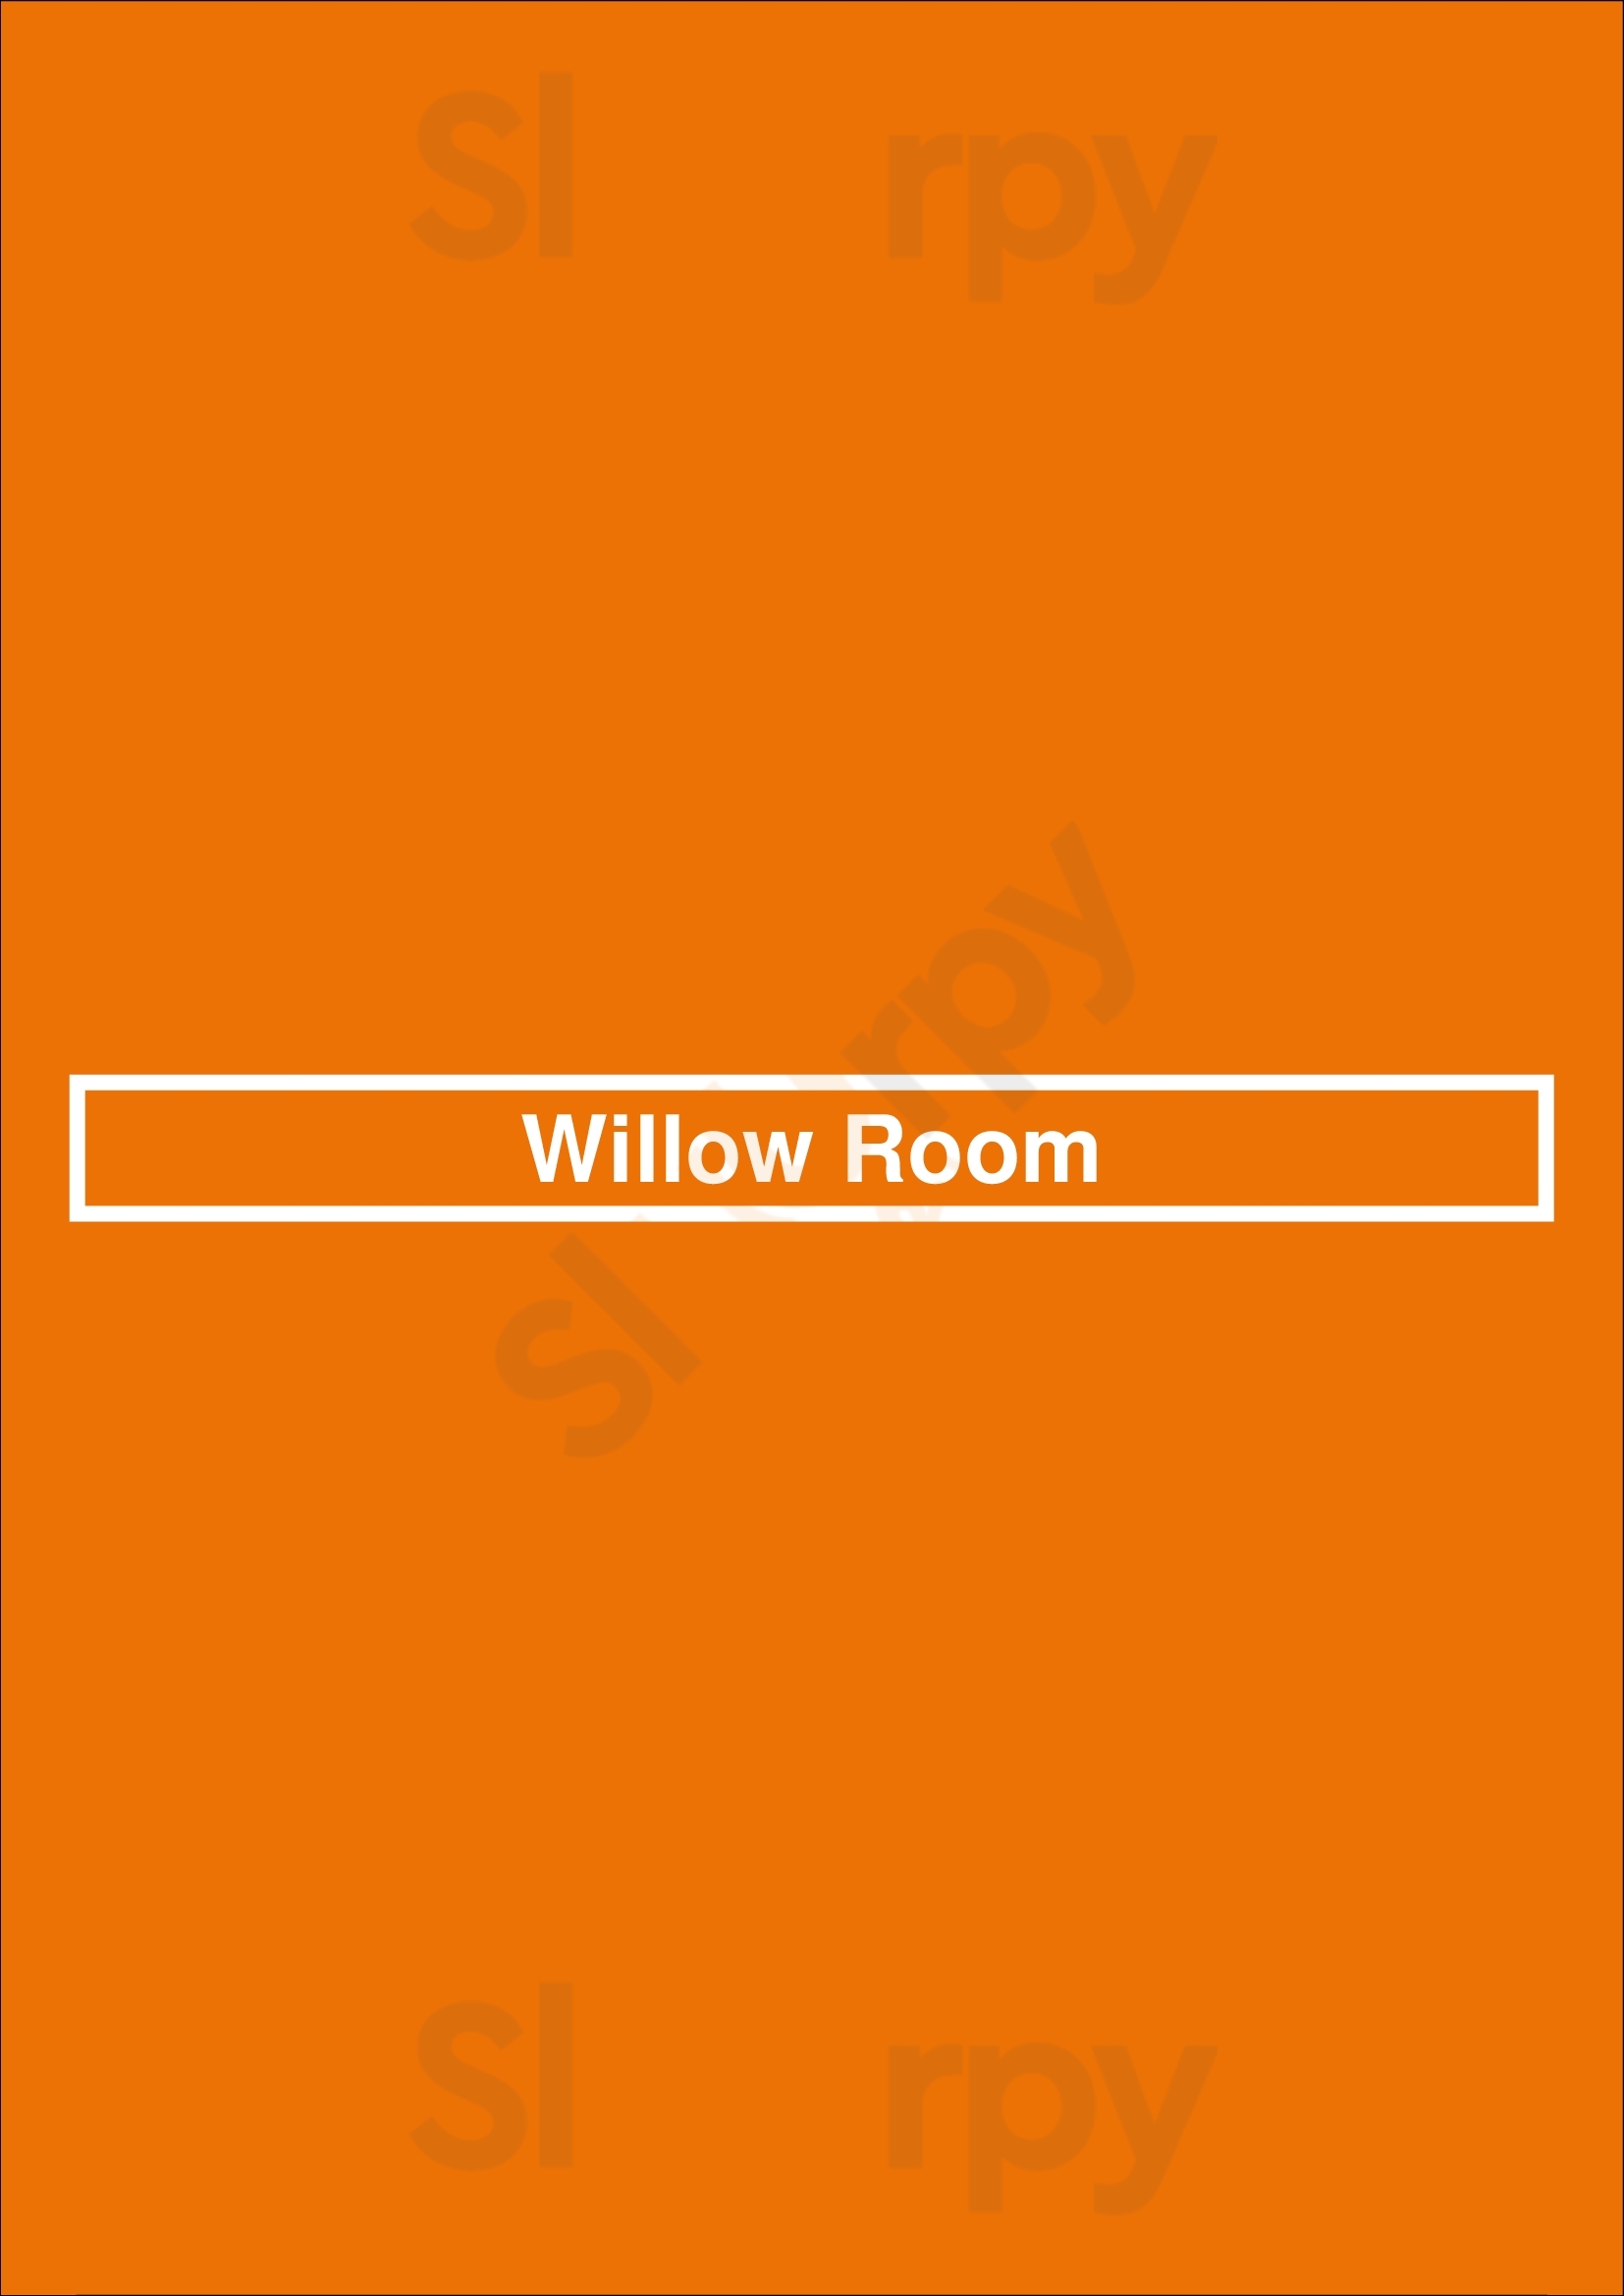 Willow Room Chicago Menu - 1